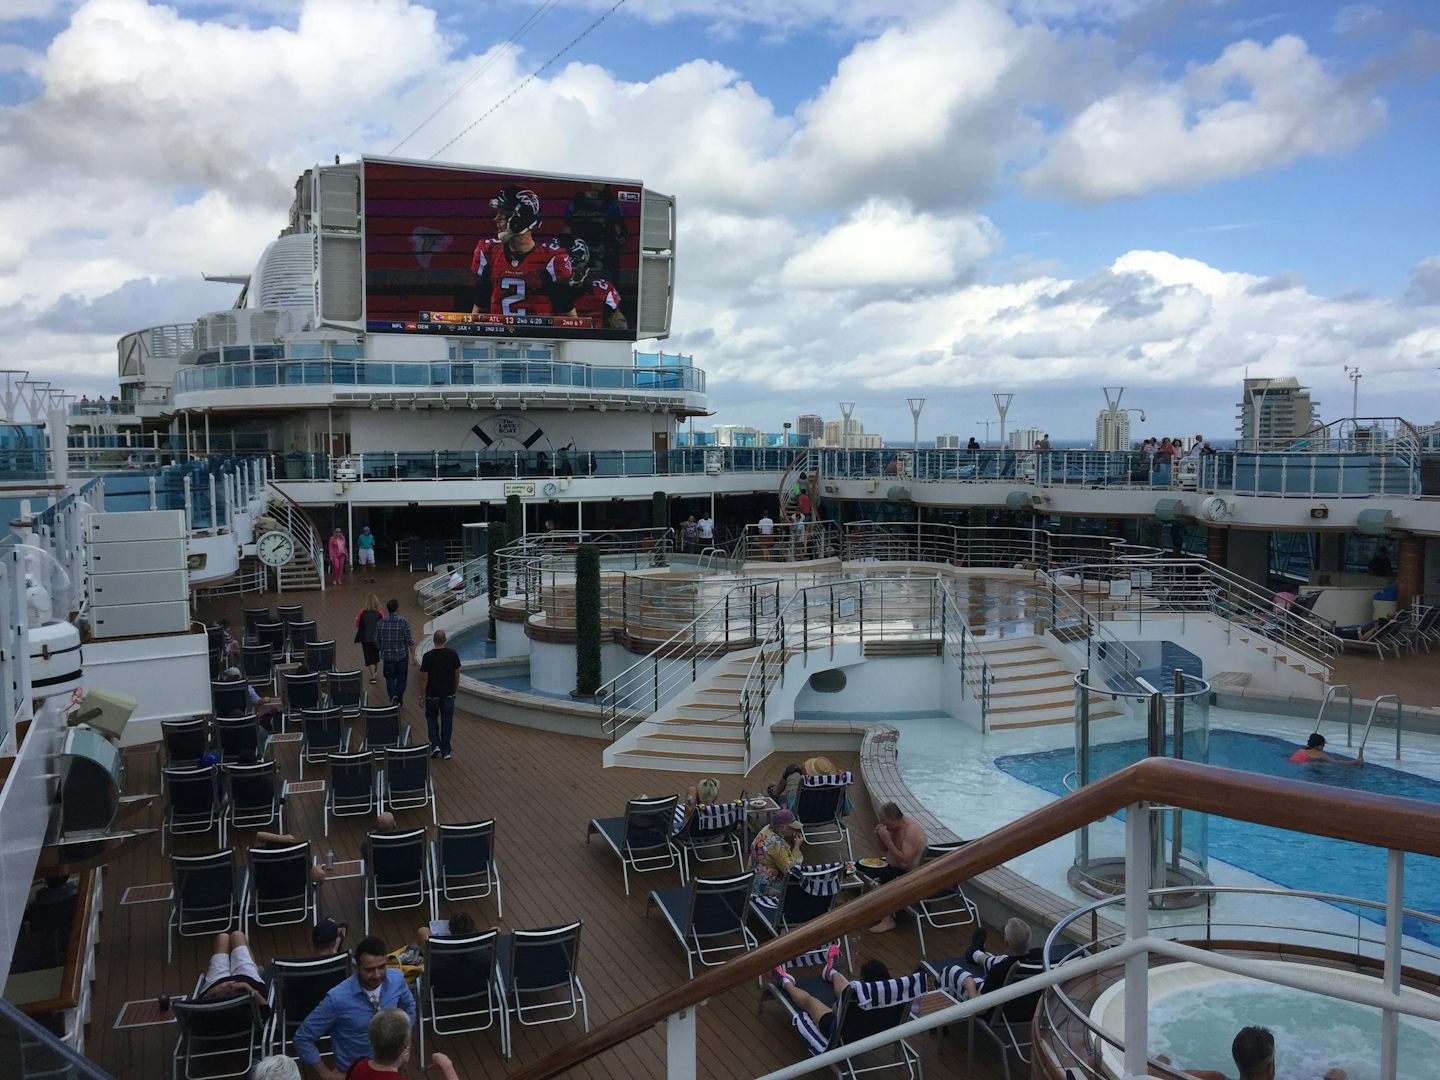 Lido deck pools and Jumbotron played sports and movies all day.